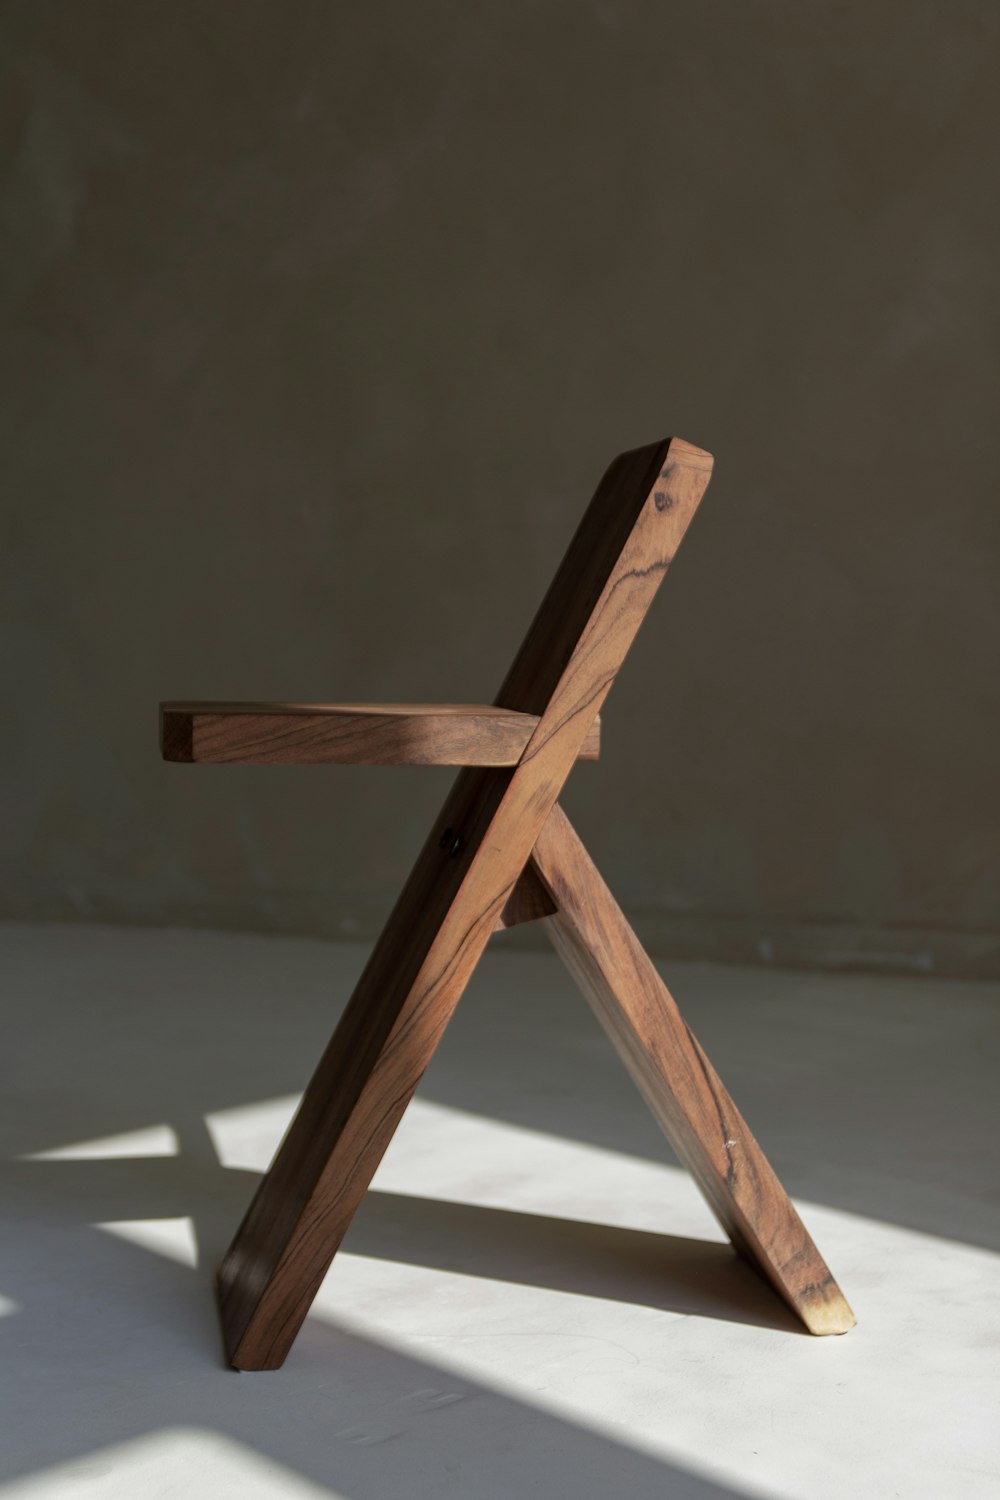 a wooden chair on a white surface